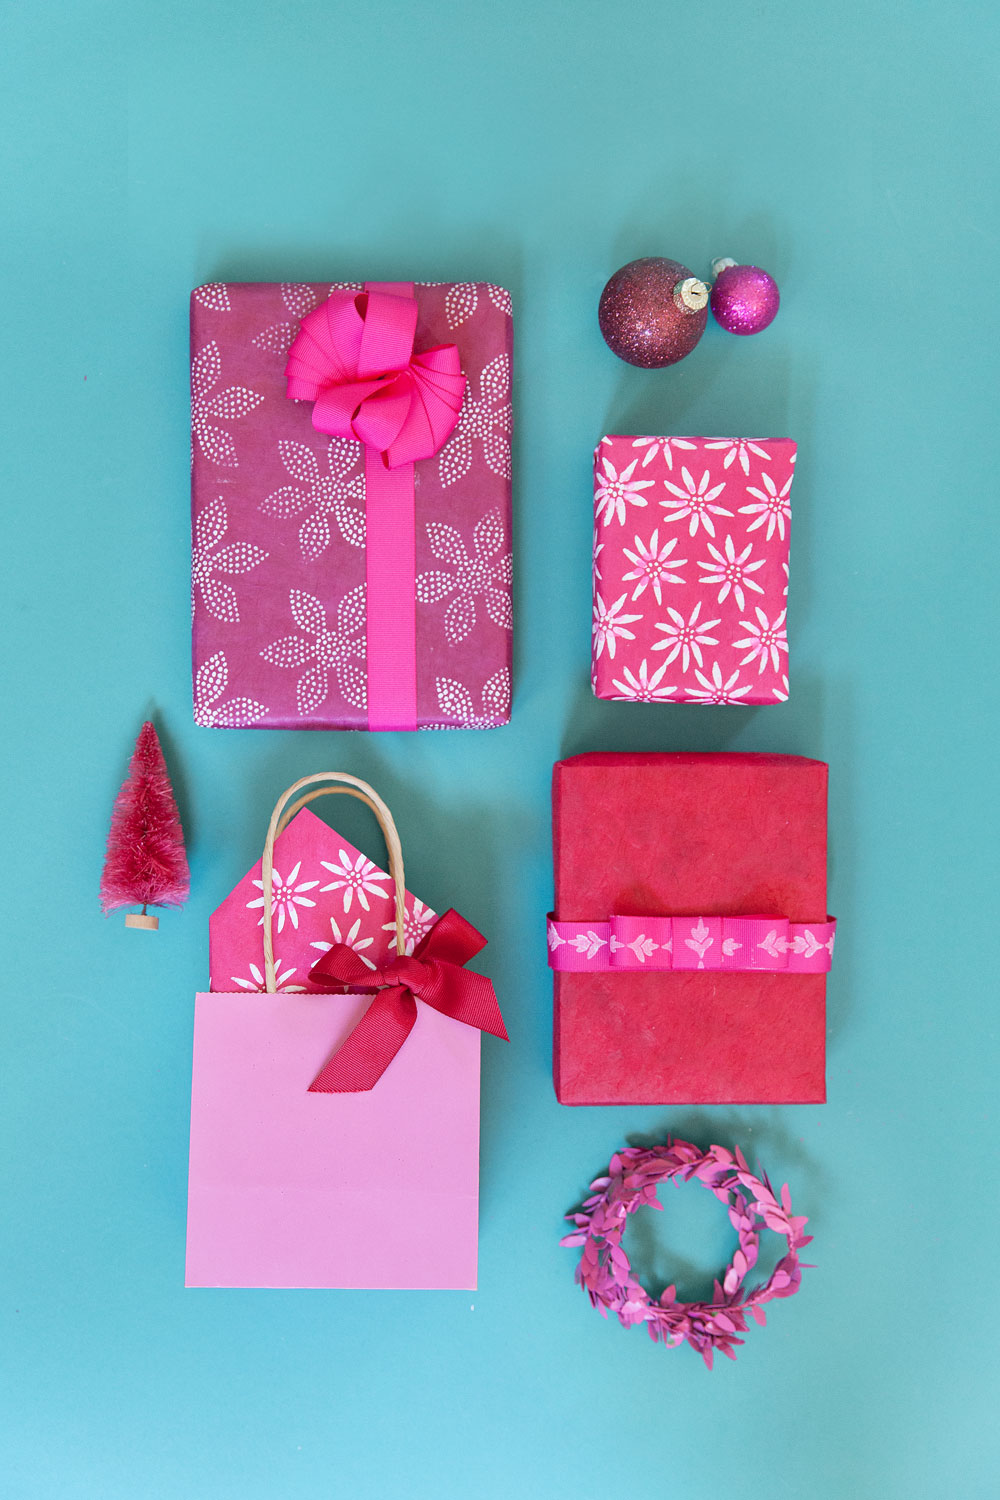 Learn how to make your wrapping paper beautiful with this DIY stencil gift wrap tutorial. It's simple, fast and will take your gift giving to the next level